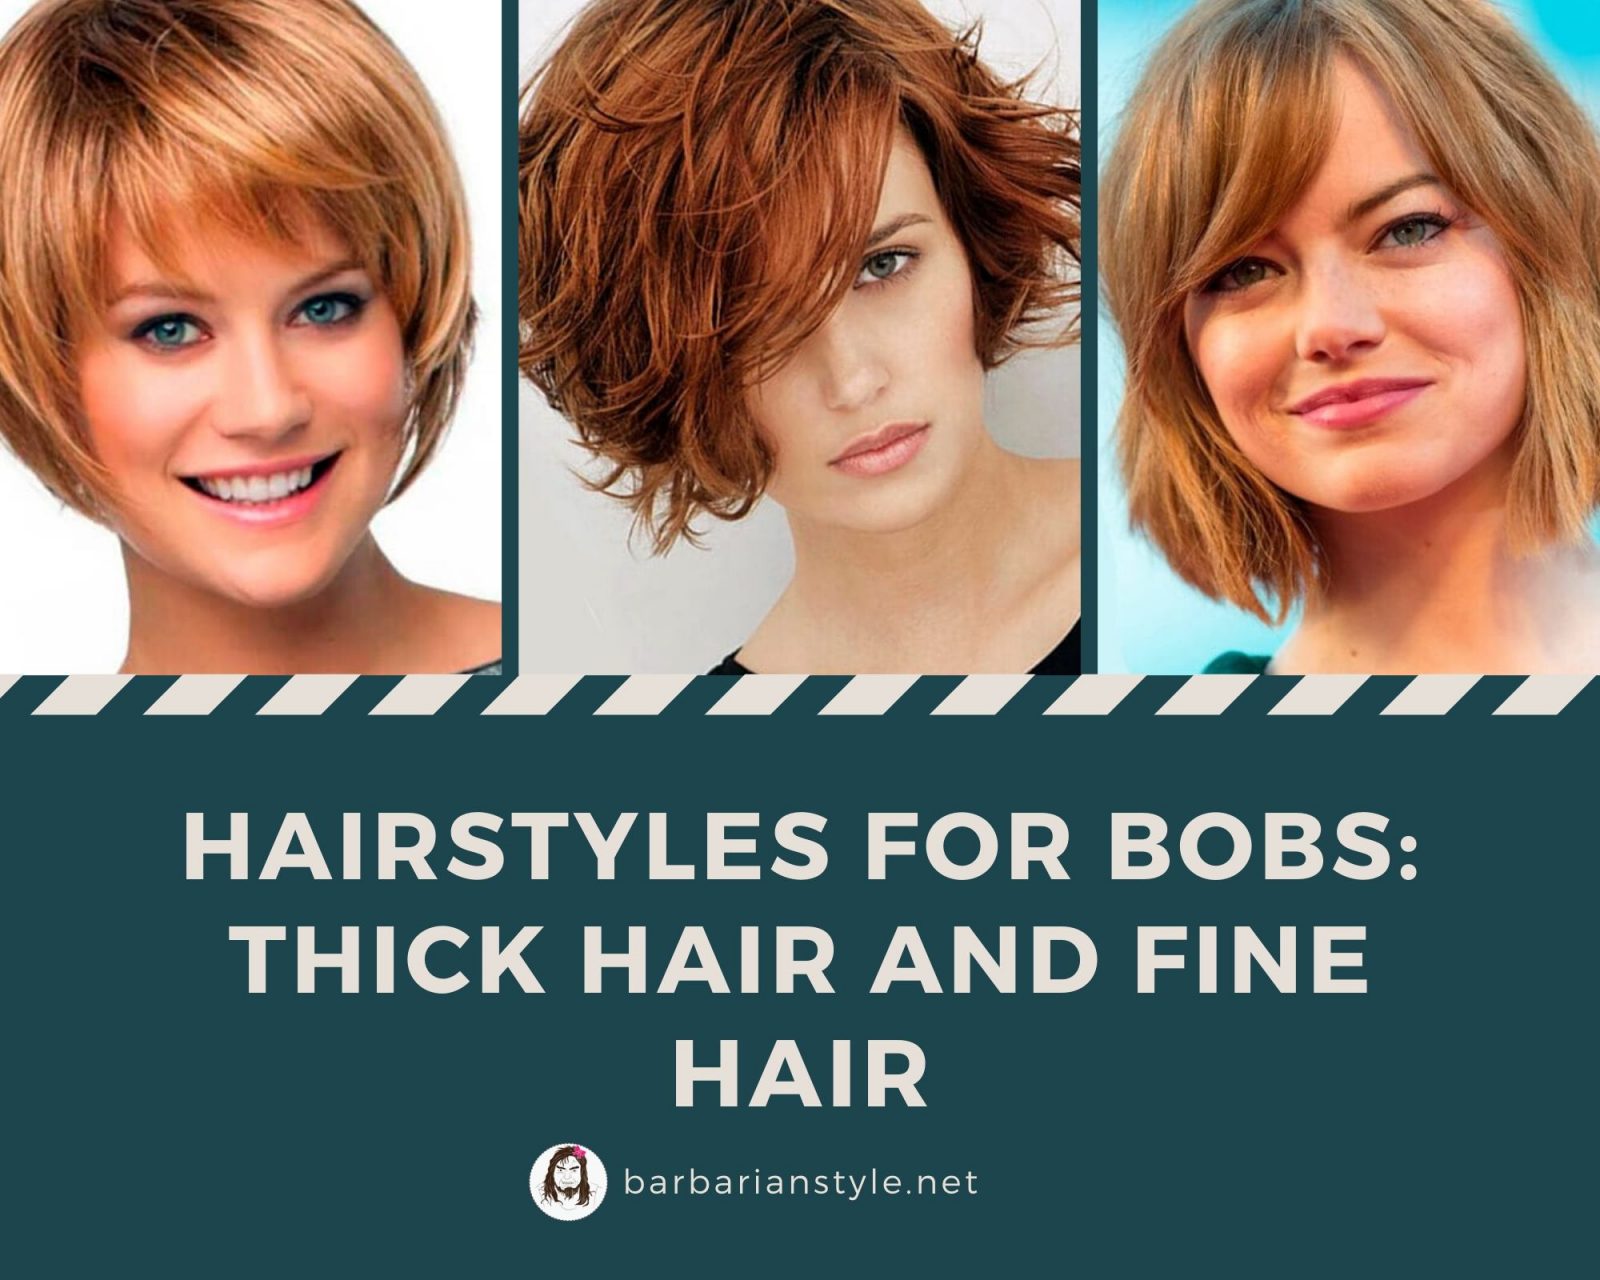 Hairstyles For Bobs Thick Hair And